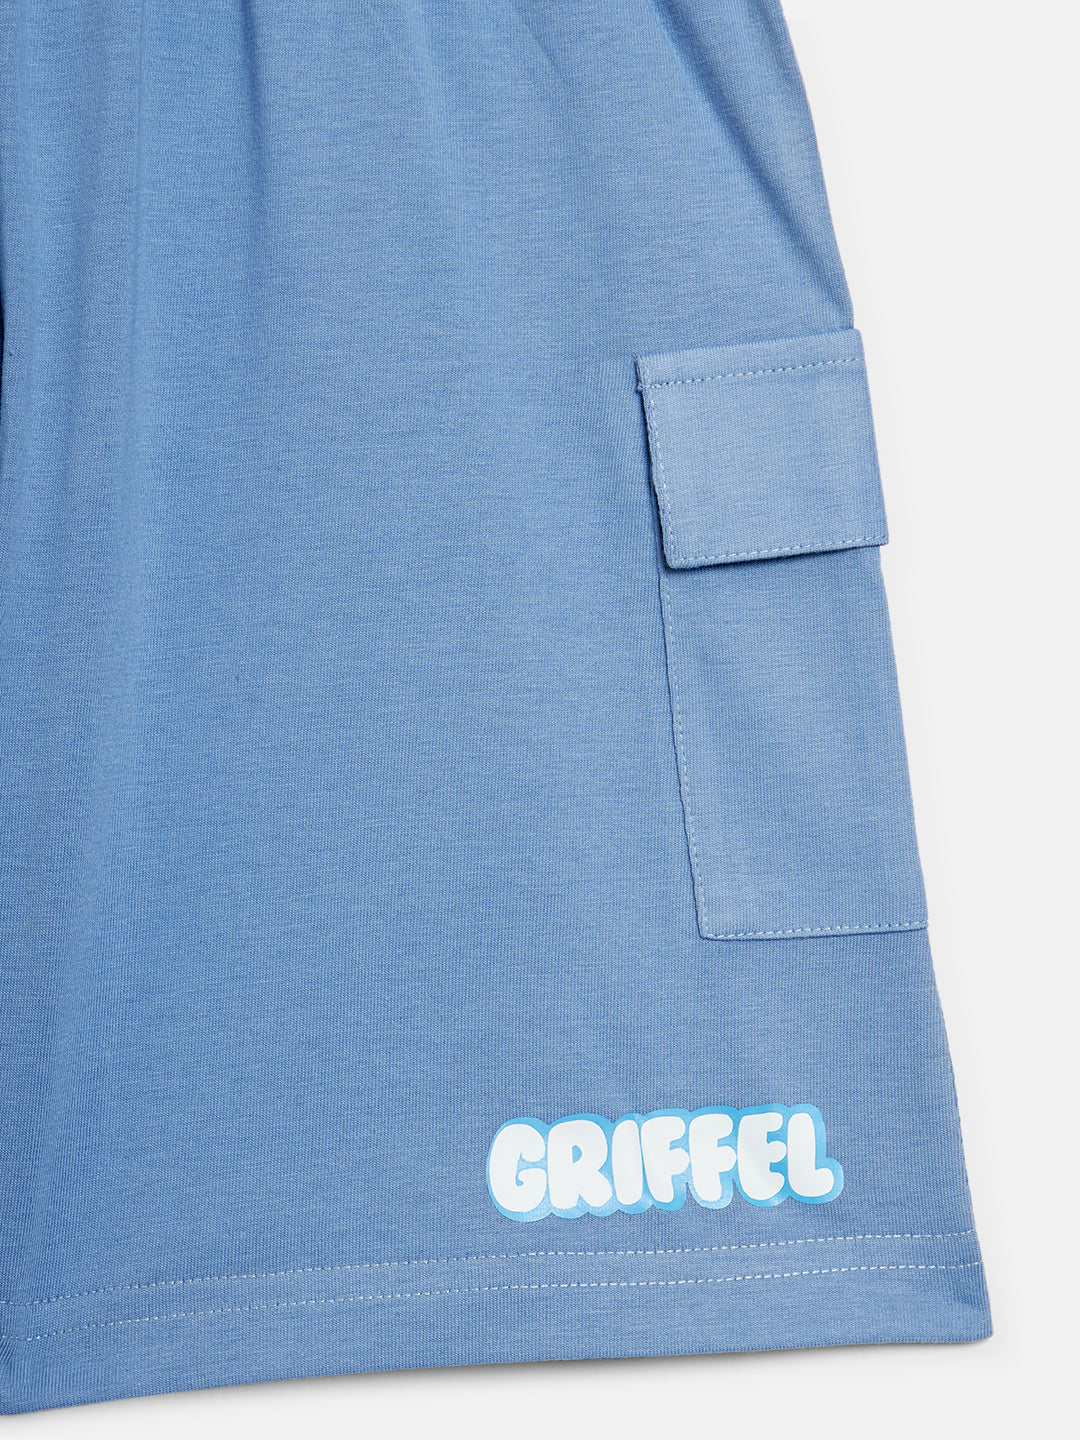 GRIFFEL Boys Kids Sky Blue Co-Ord T-shirt and Short Set - griffel